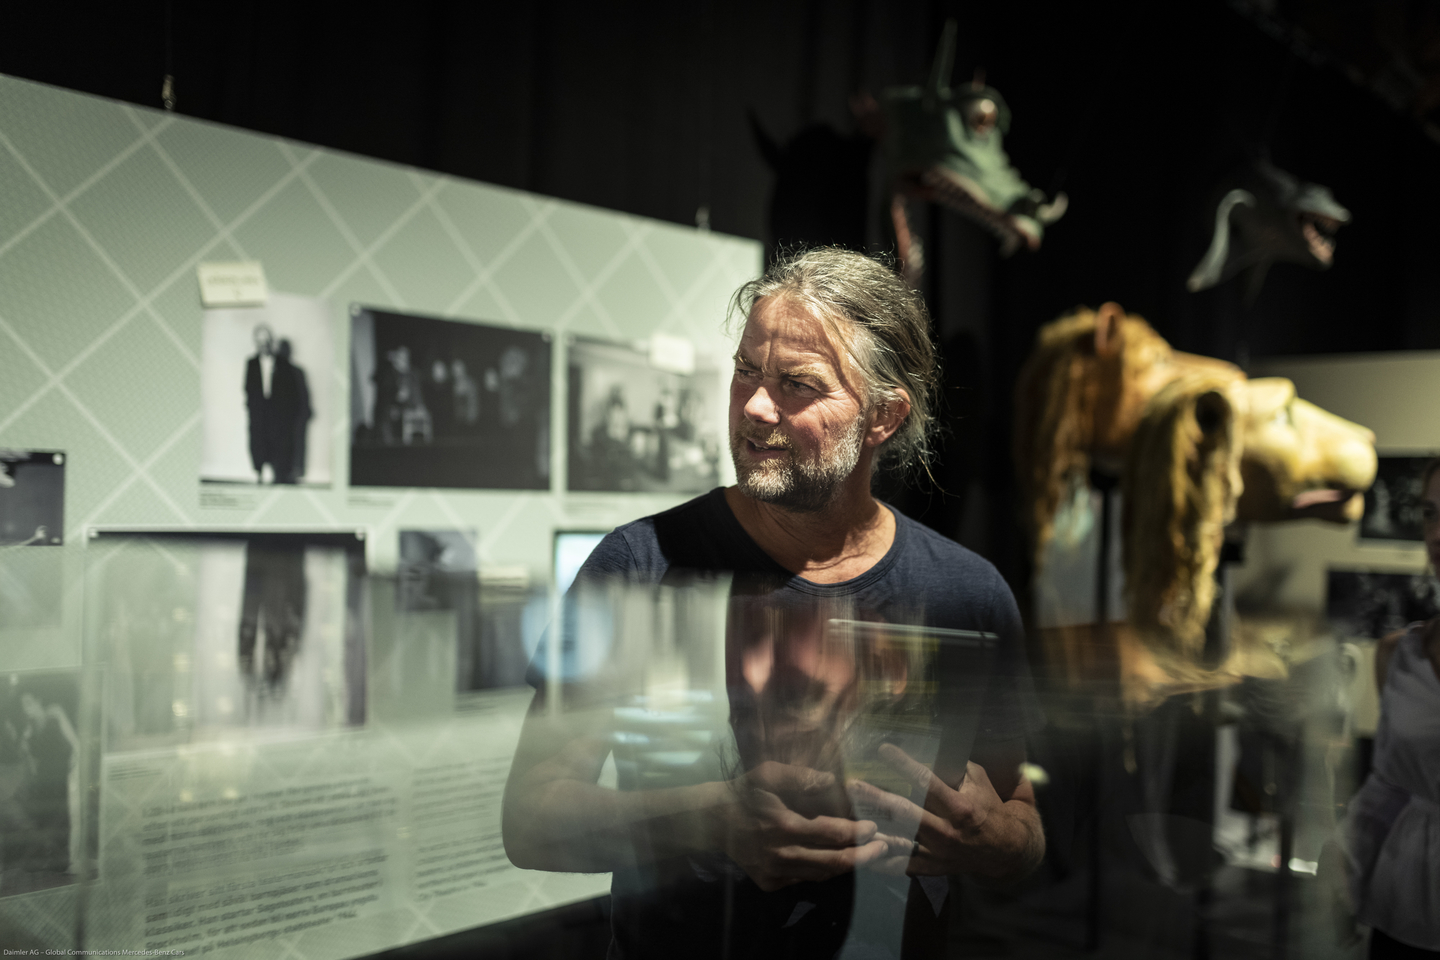 Exploration Day brought registrants to different Stockholm museums, including the Scenkonstmuseet (Swedish Museum of Performing Arts) and its special Ingmar Bergman exhibit. Photo by Teymur Madjderey/Daimler AG